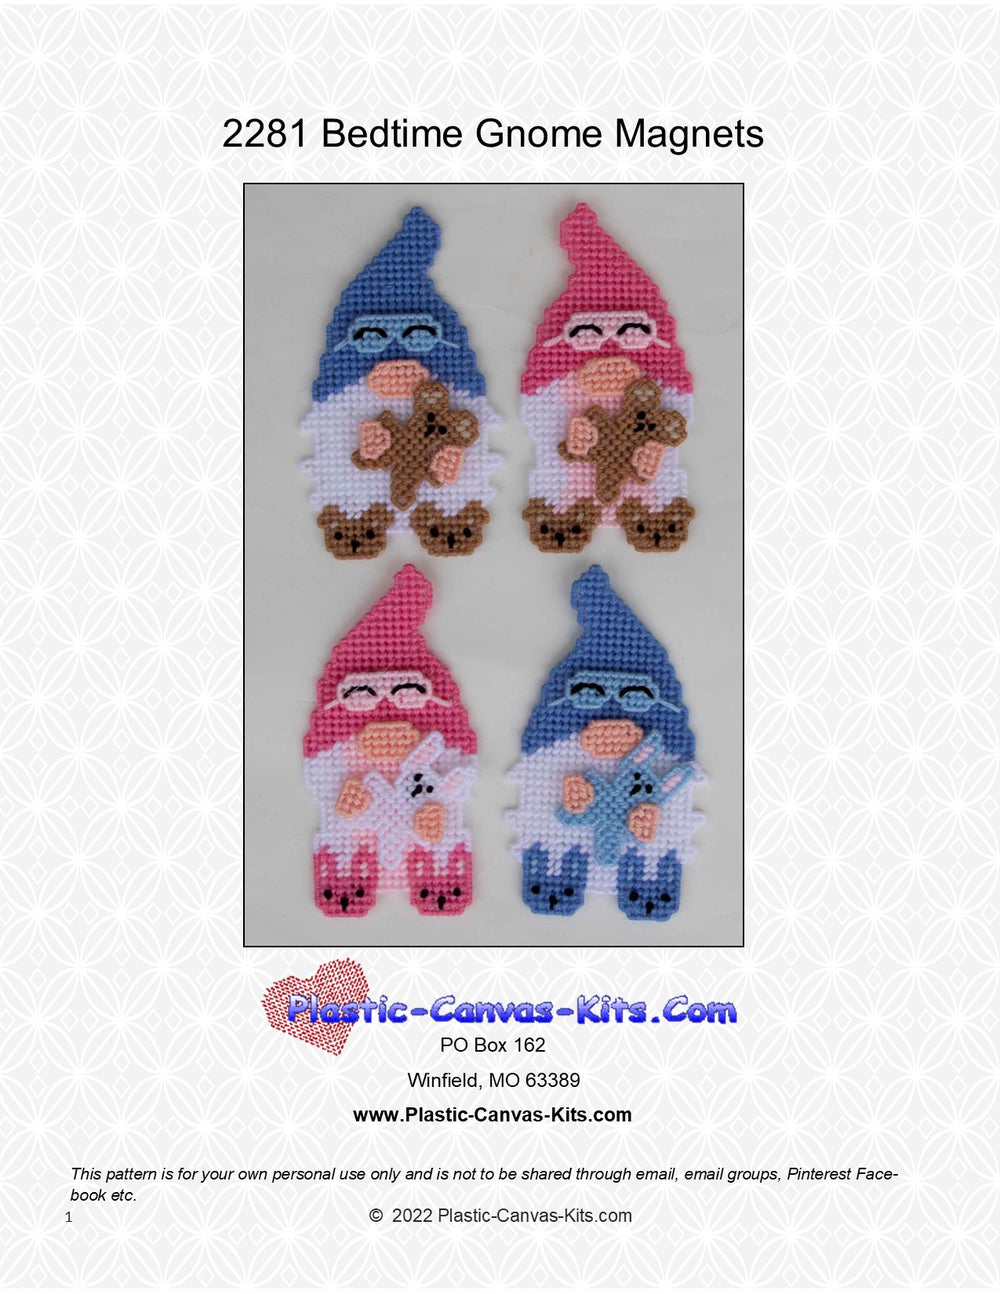 Bedtime Gnome Magnets